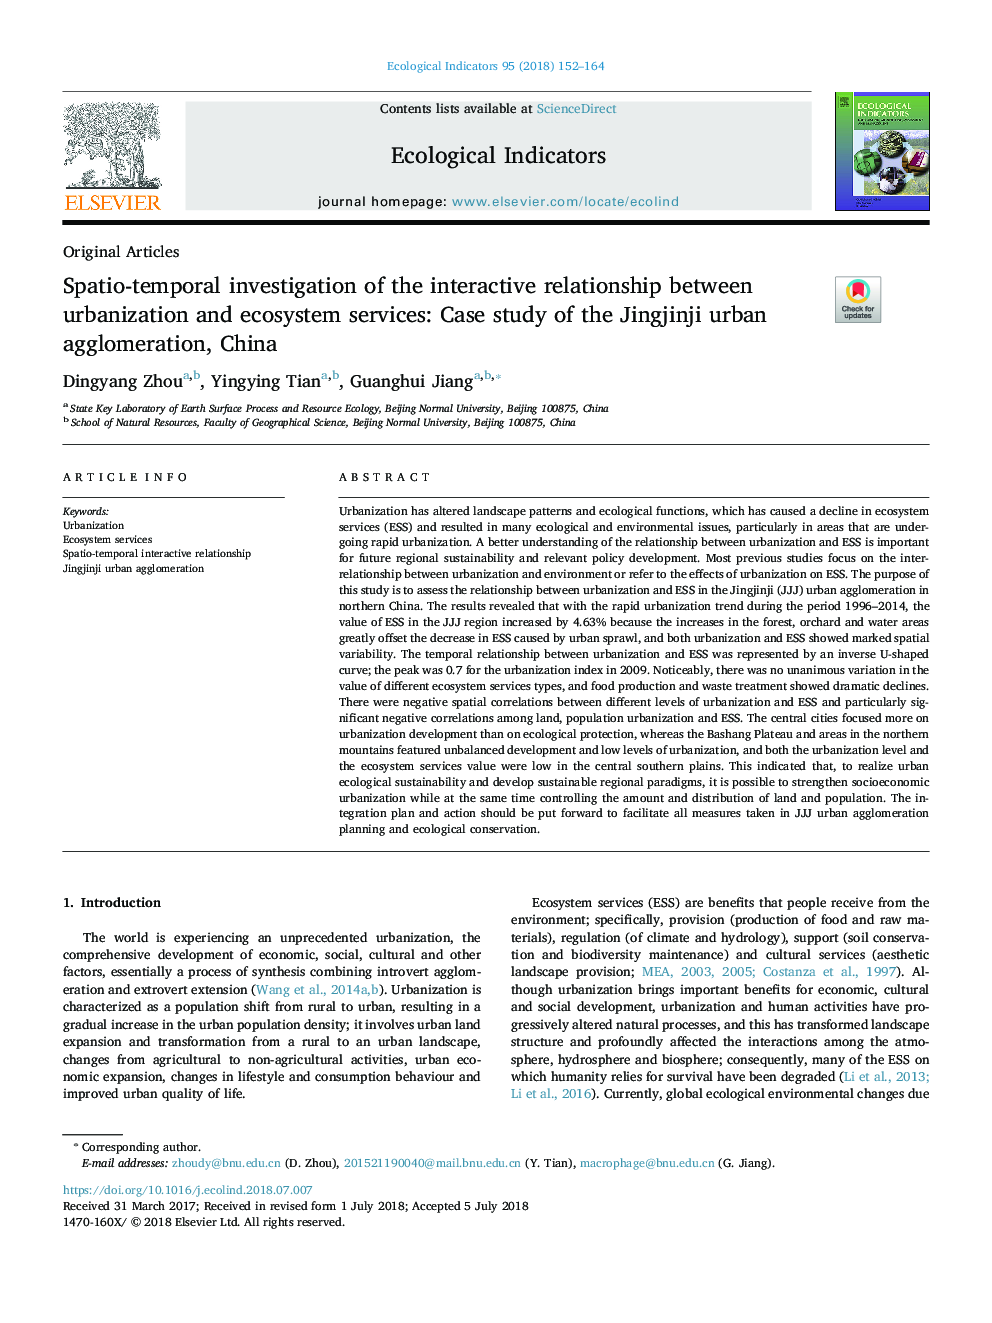 Spatio-temporal investigation of the interactive relationship between urbanization and ecosystem services: Case study of the Jingjinji urban agglomeration, China